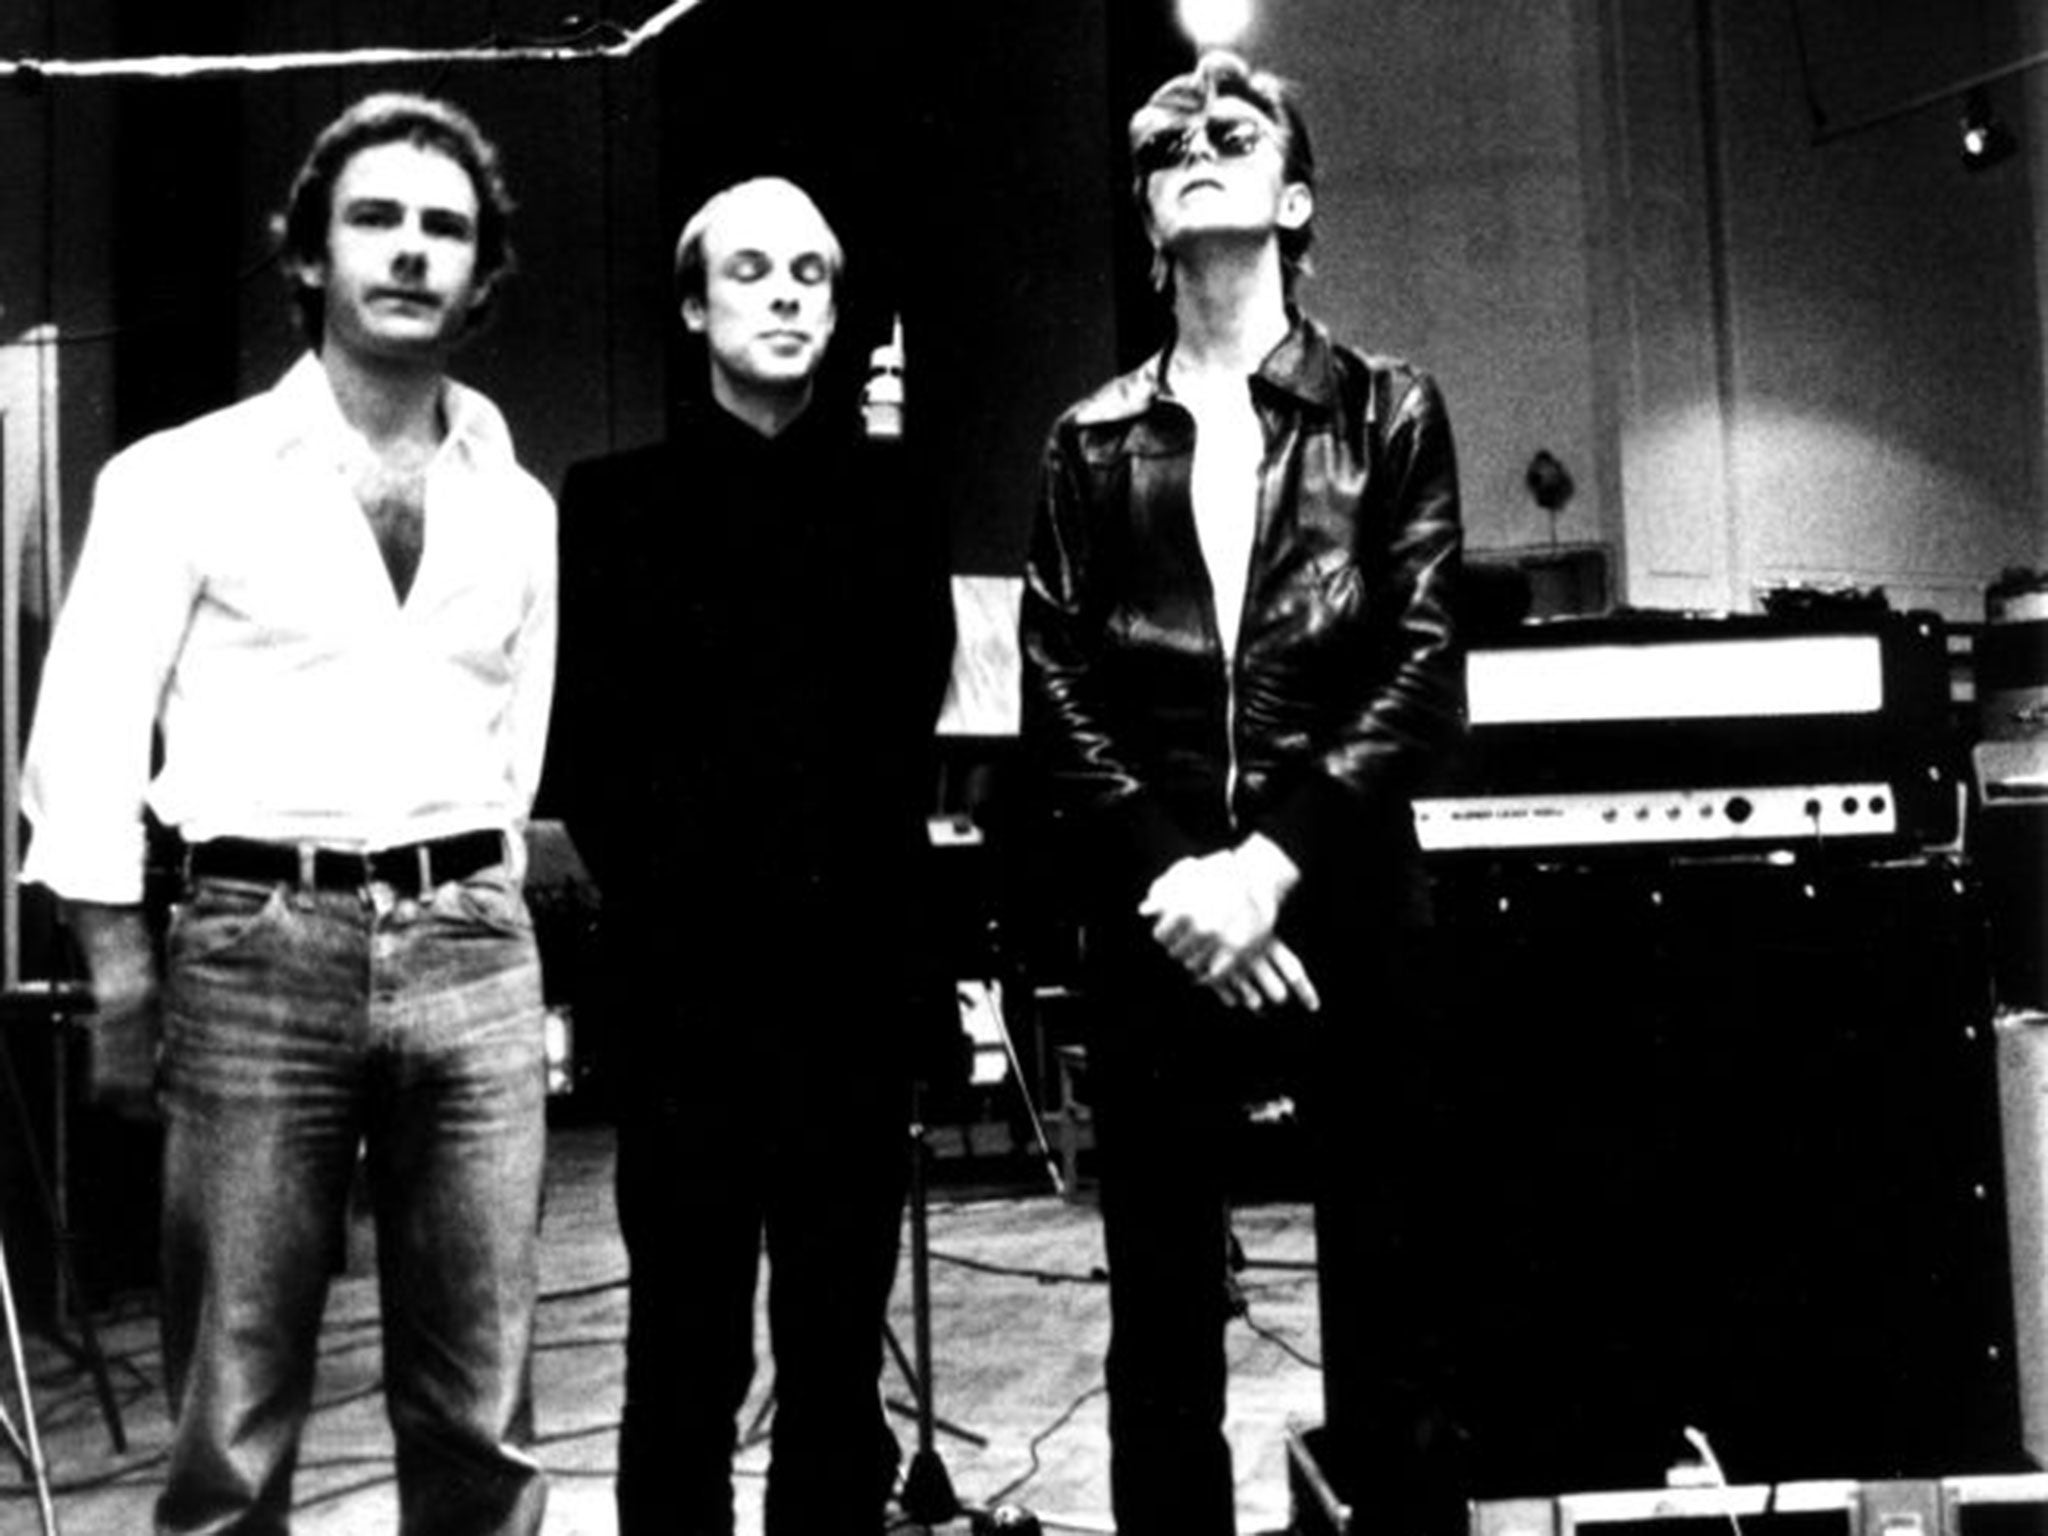 Bowie with Robert Fripp and Brian Eno, centre, in Berlin in 1977 (Michael Ochs Archives/Getty)